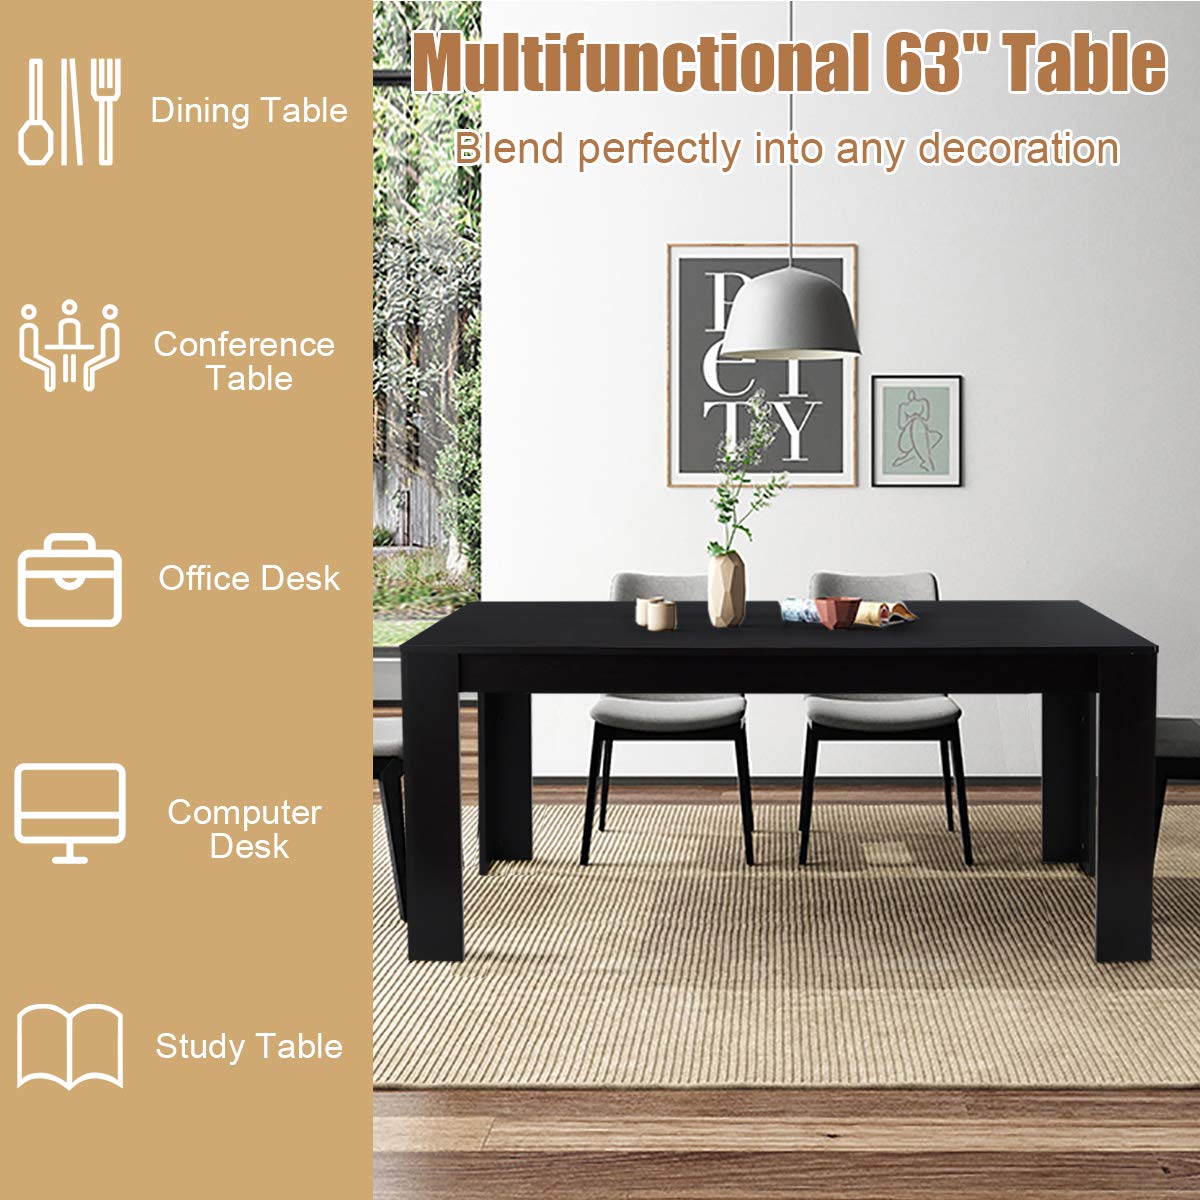 Giantex Dining Table for 6-8, Wood Rectangular Table, 63" L x 31.5" W x 30" H Large Farmhouse Center Table